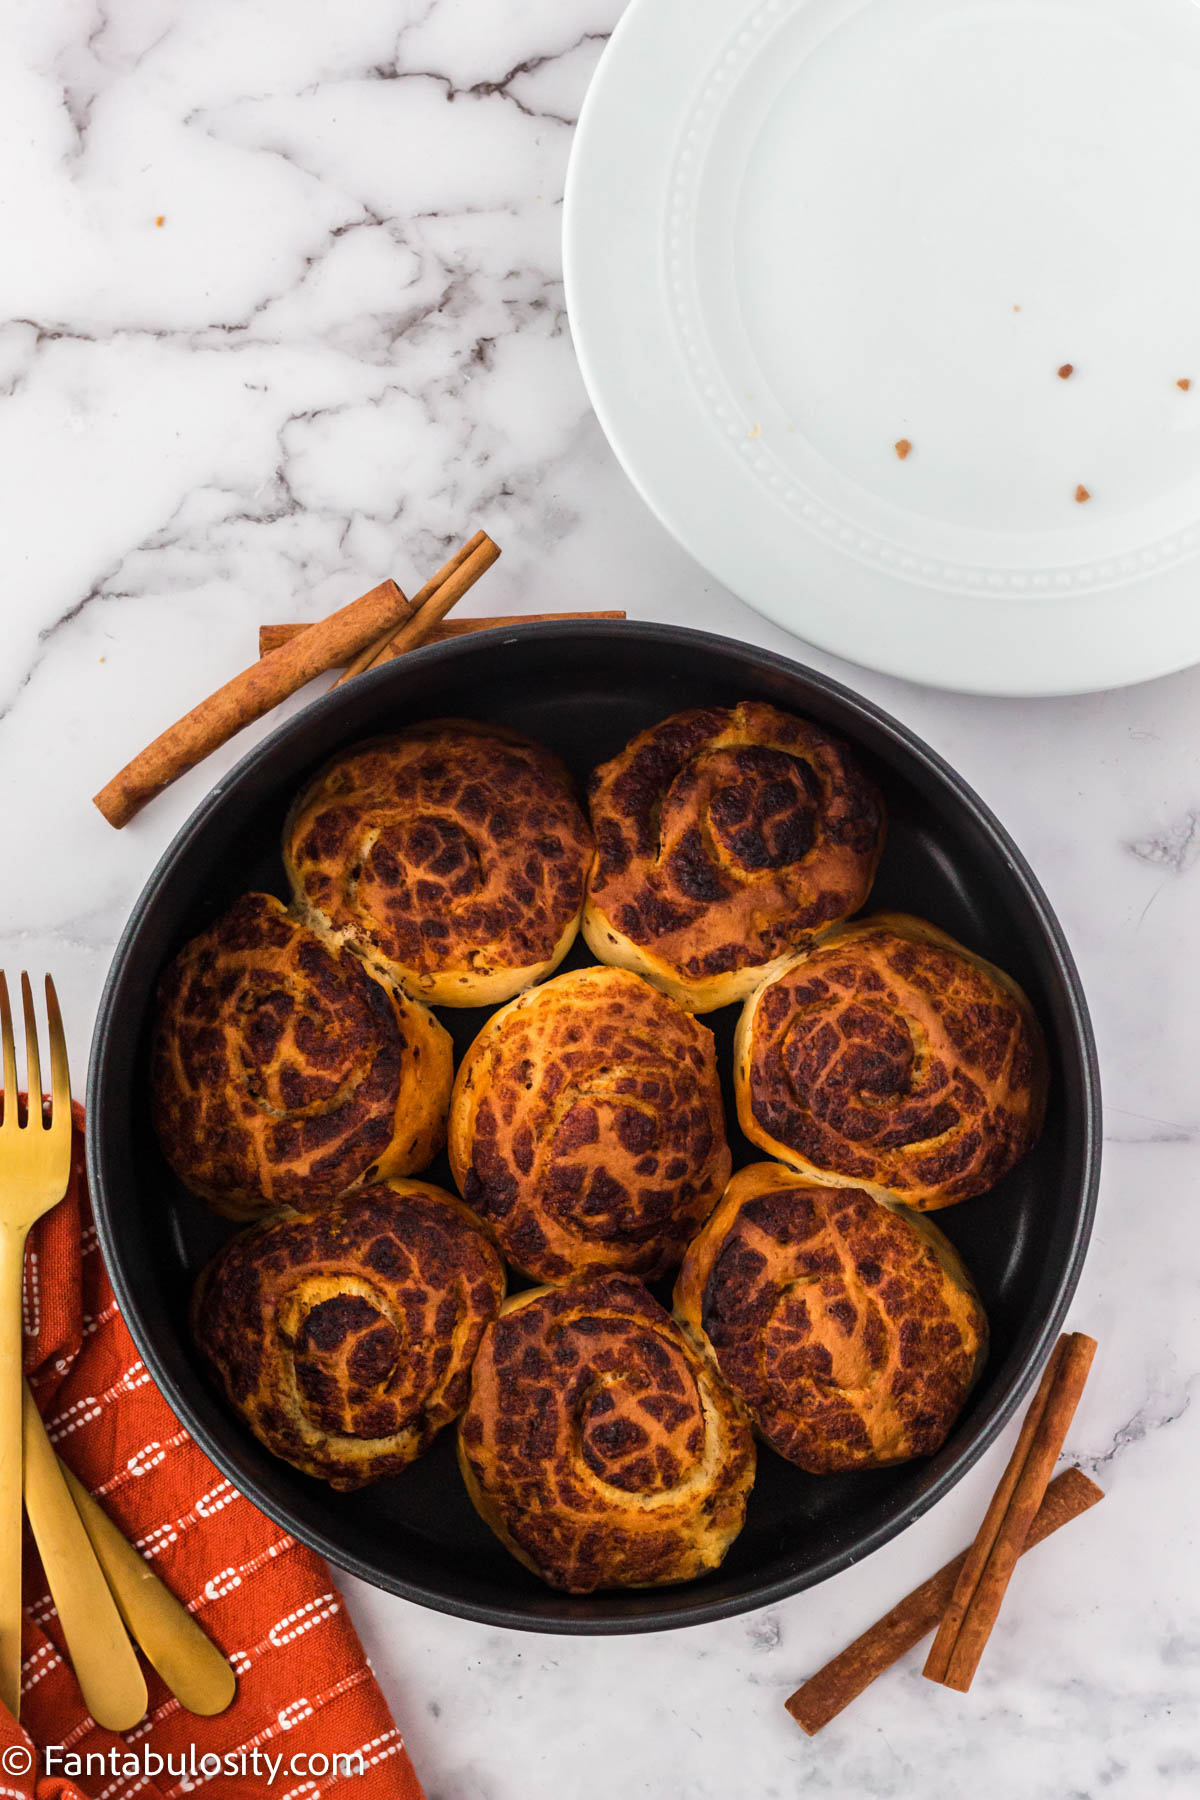 Cooked canned cinnamon rolls in air fryer basket